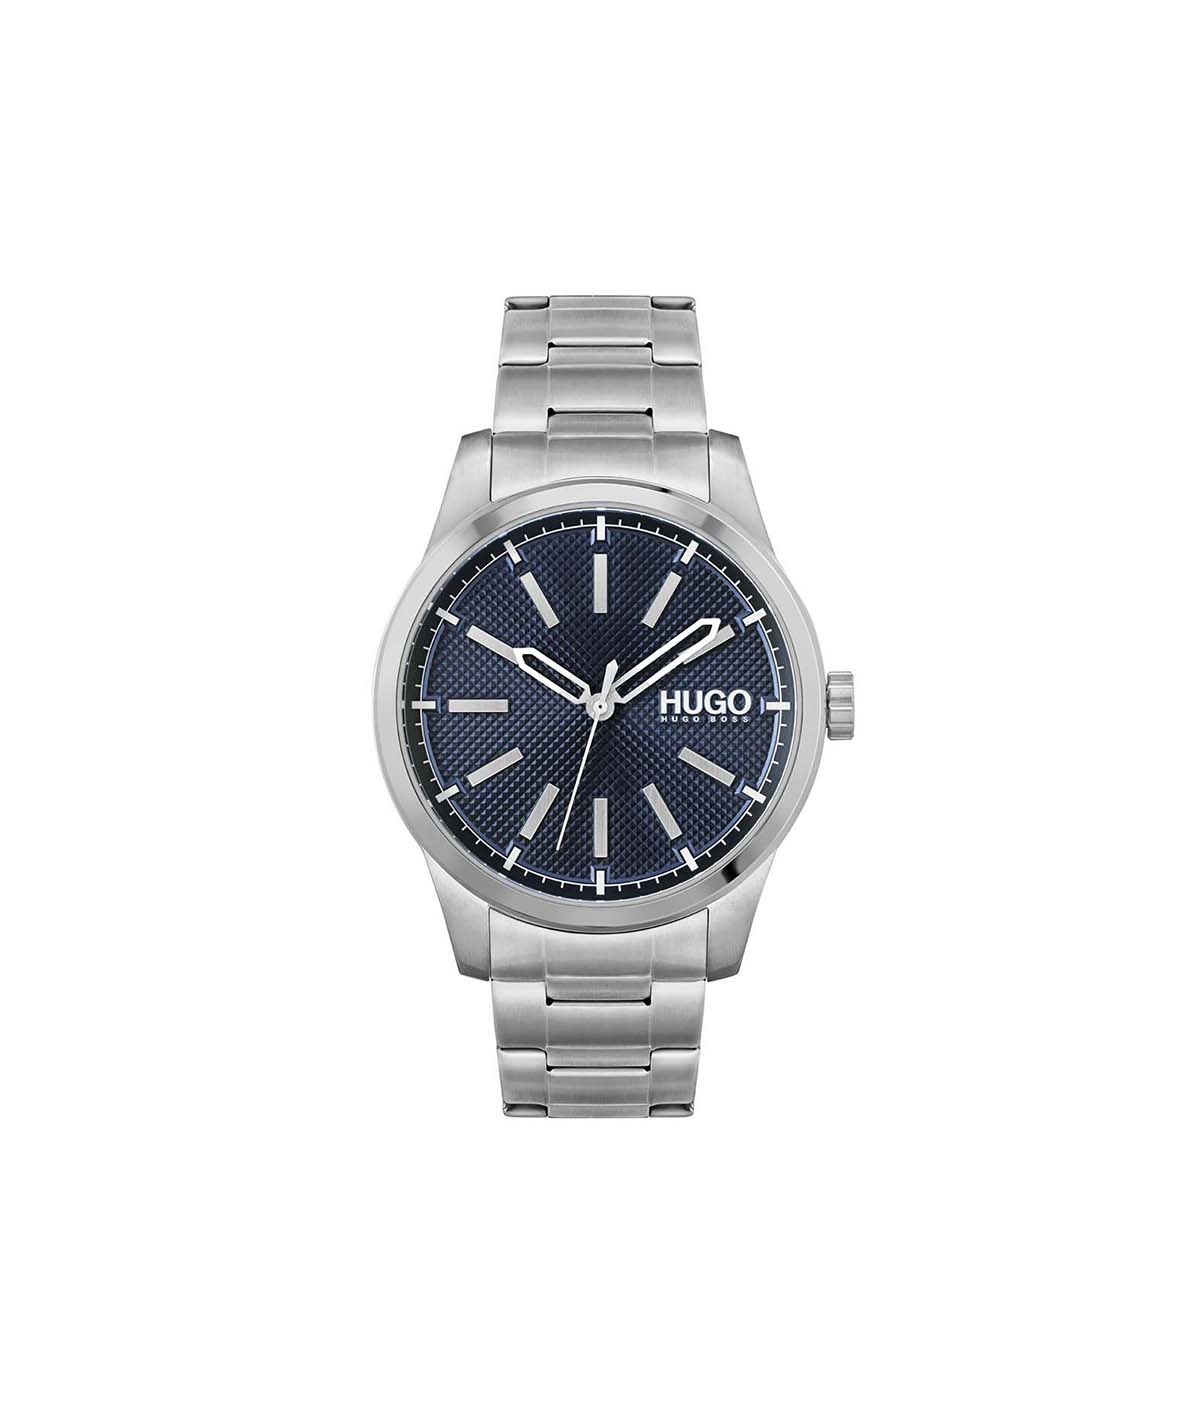 Watch Hugo Boss 1530206 | e-stavros | Crosses | Chains | Watches